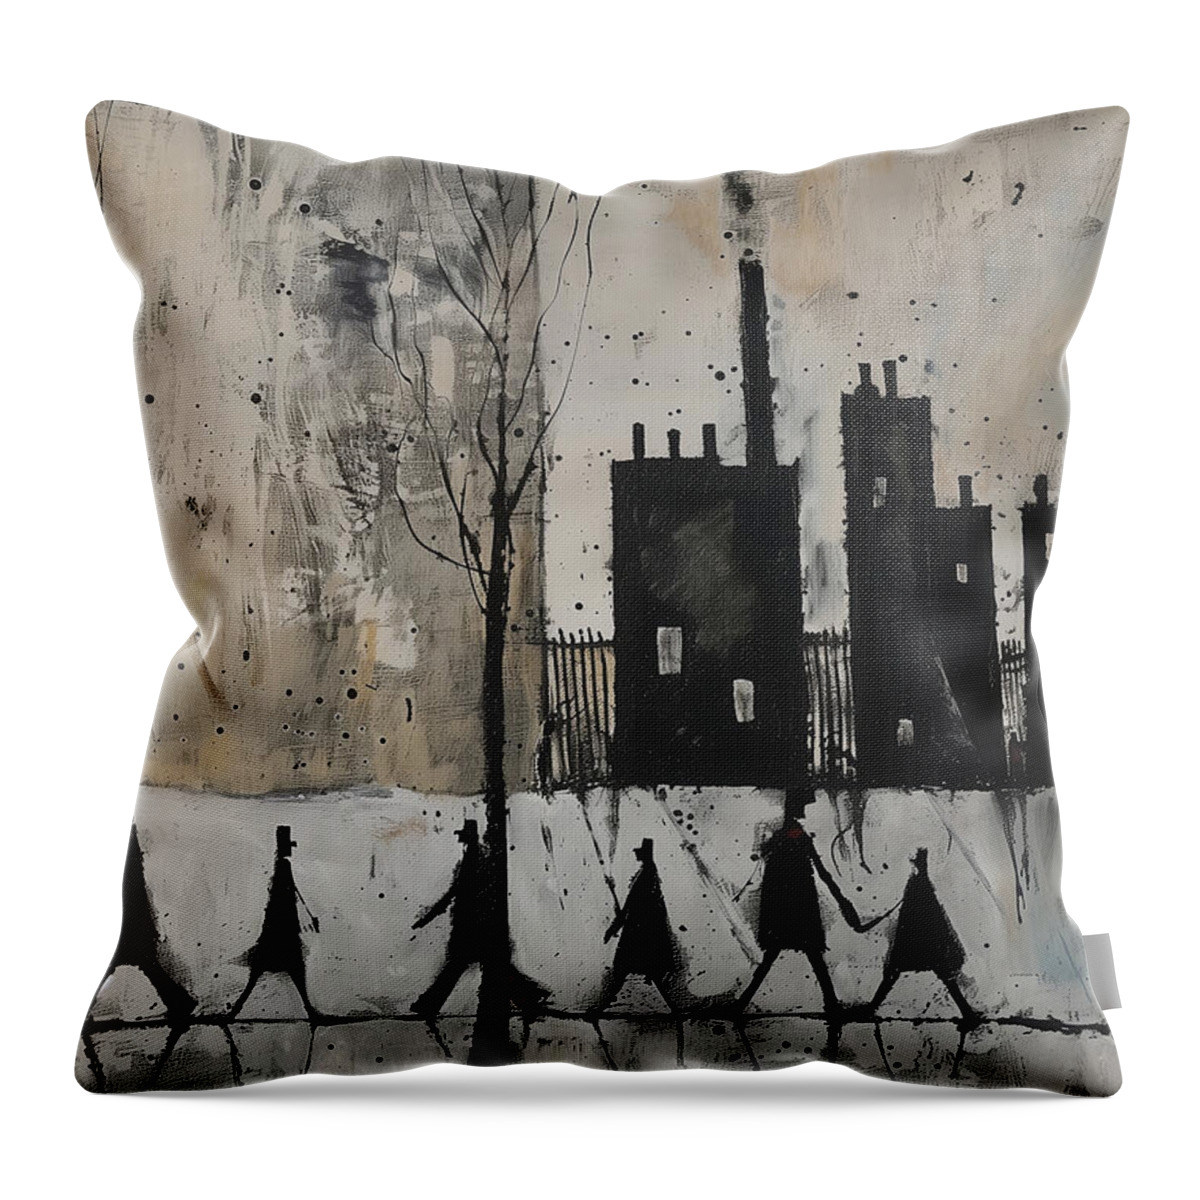  Throw Pillow featuring the mixed media Matchstalk Men #54 by Stephen Smith Galleries